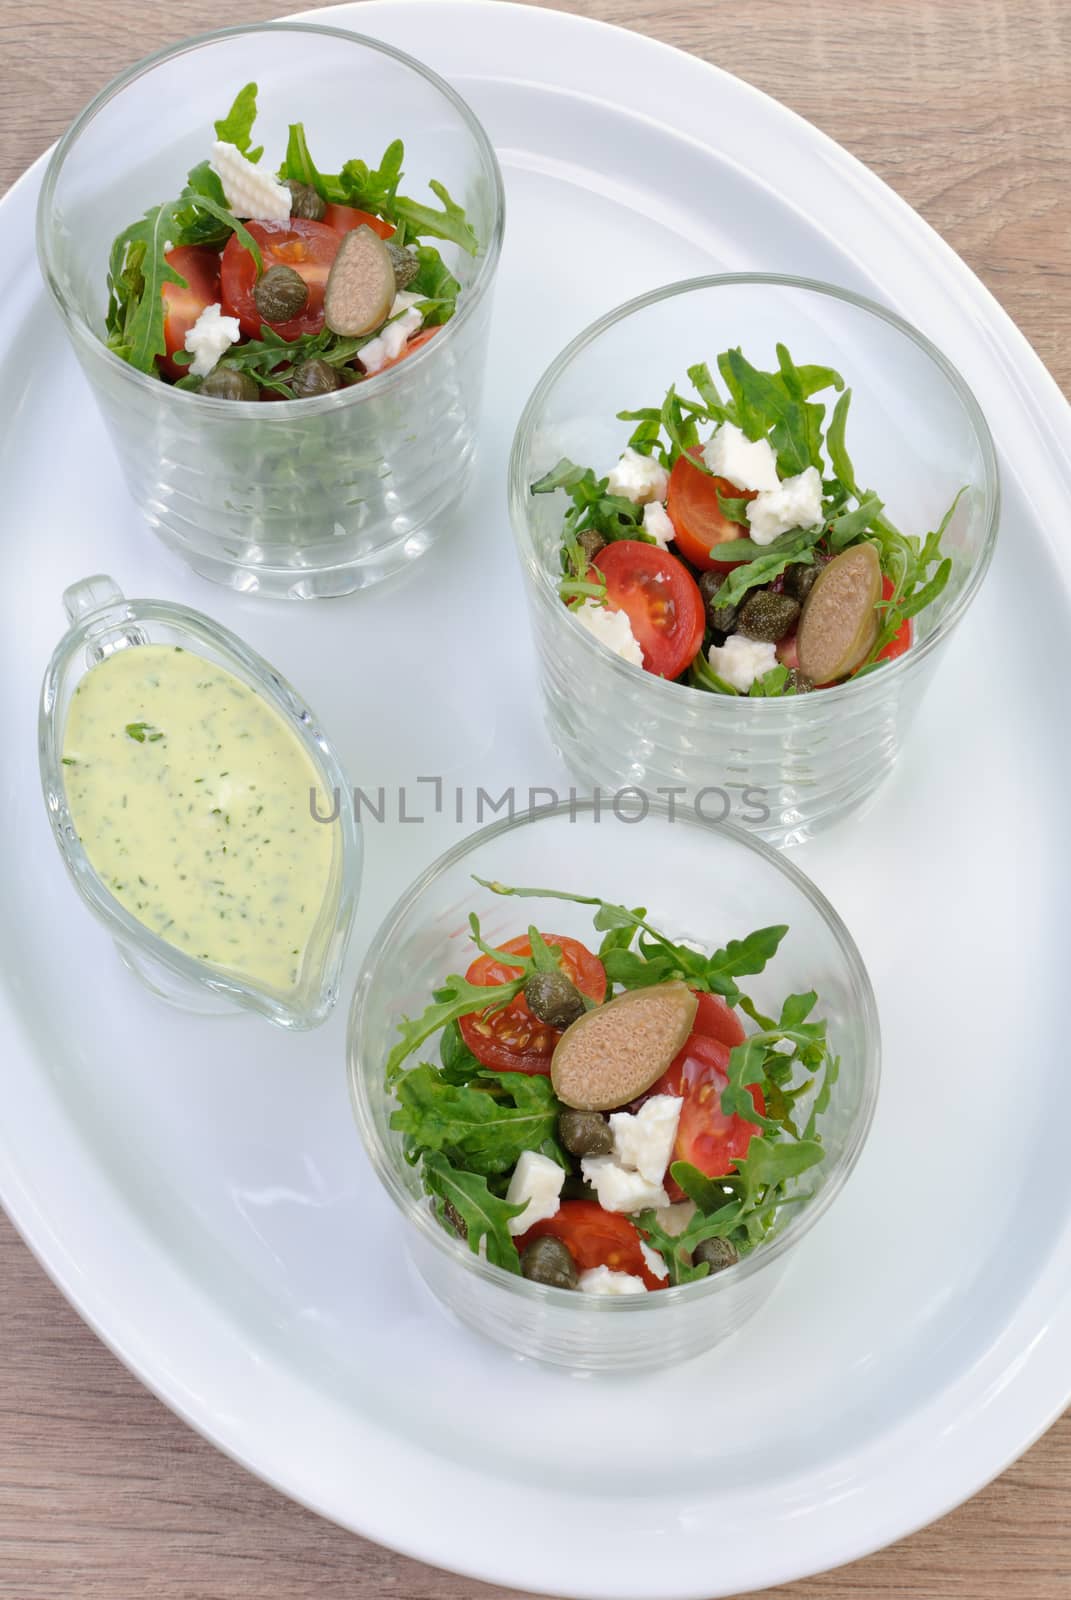 Arugula salad in a glass by Apolonia